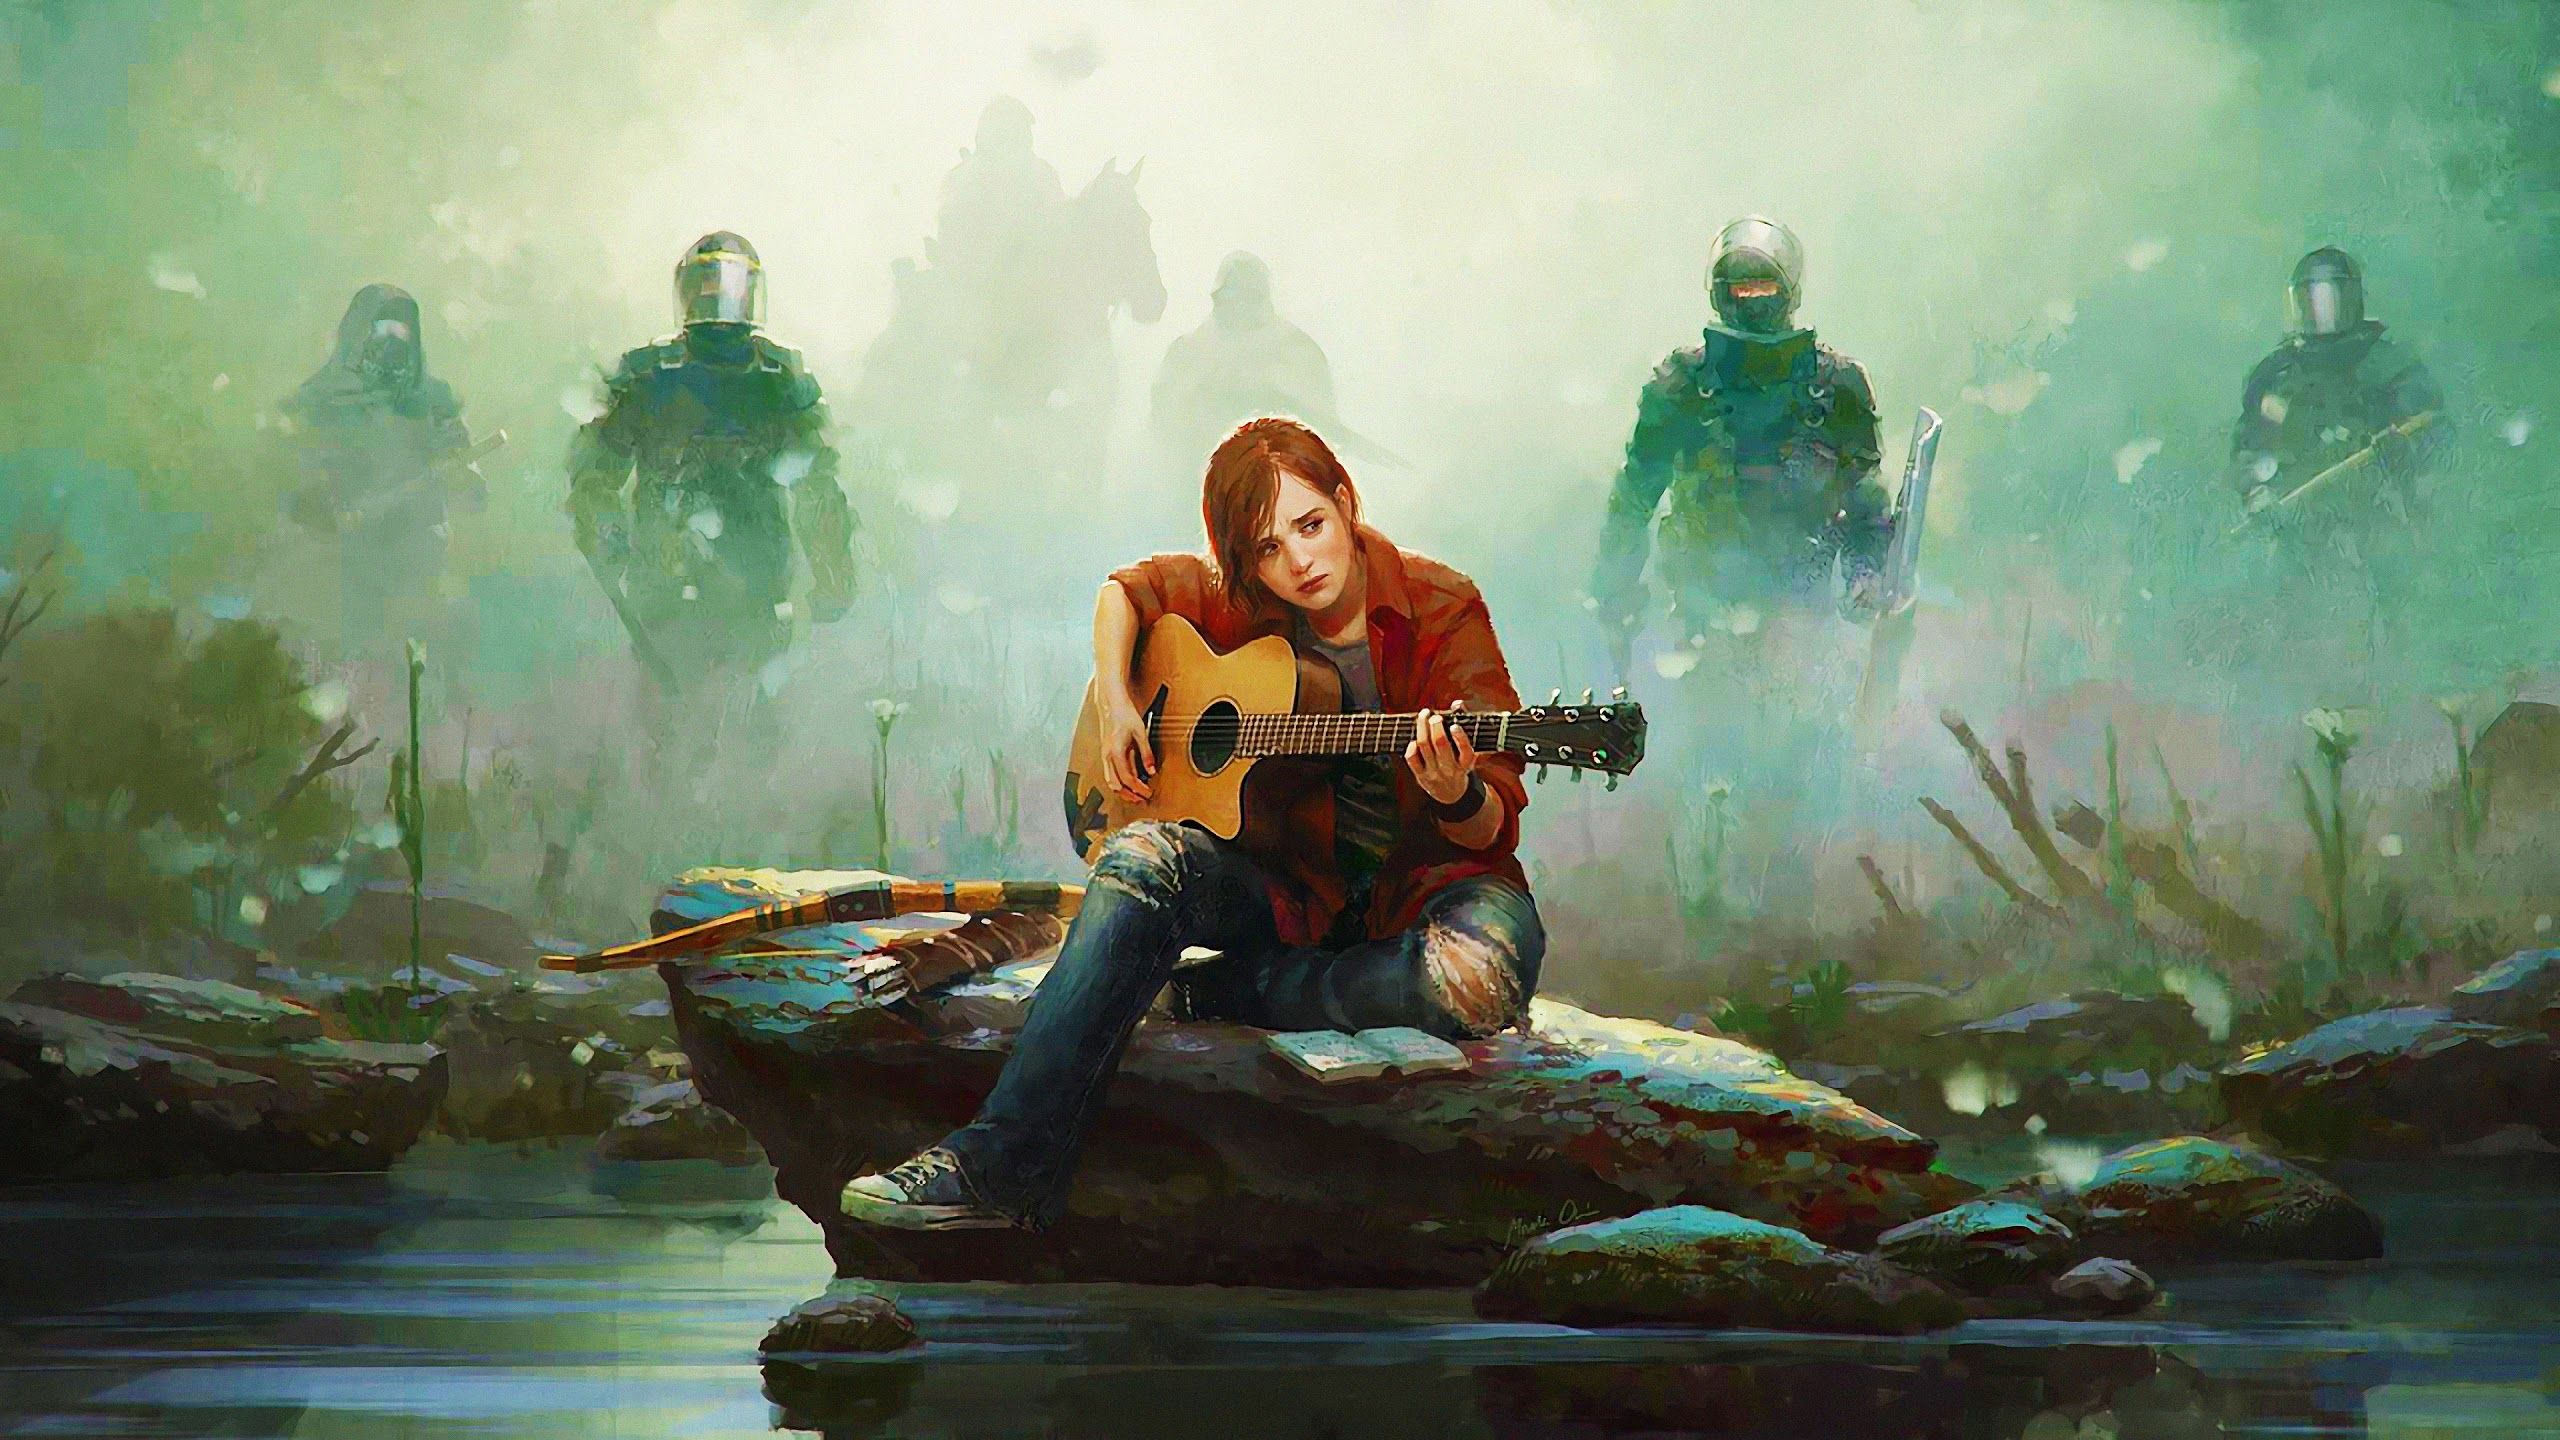 The Last Of Us Part 2 Wallpaper,HD Games Wallpapers,4k Wallpapers